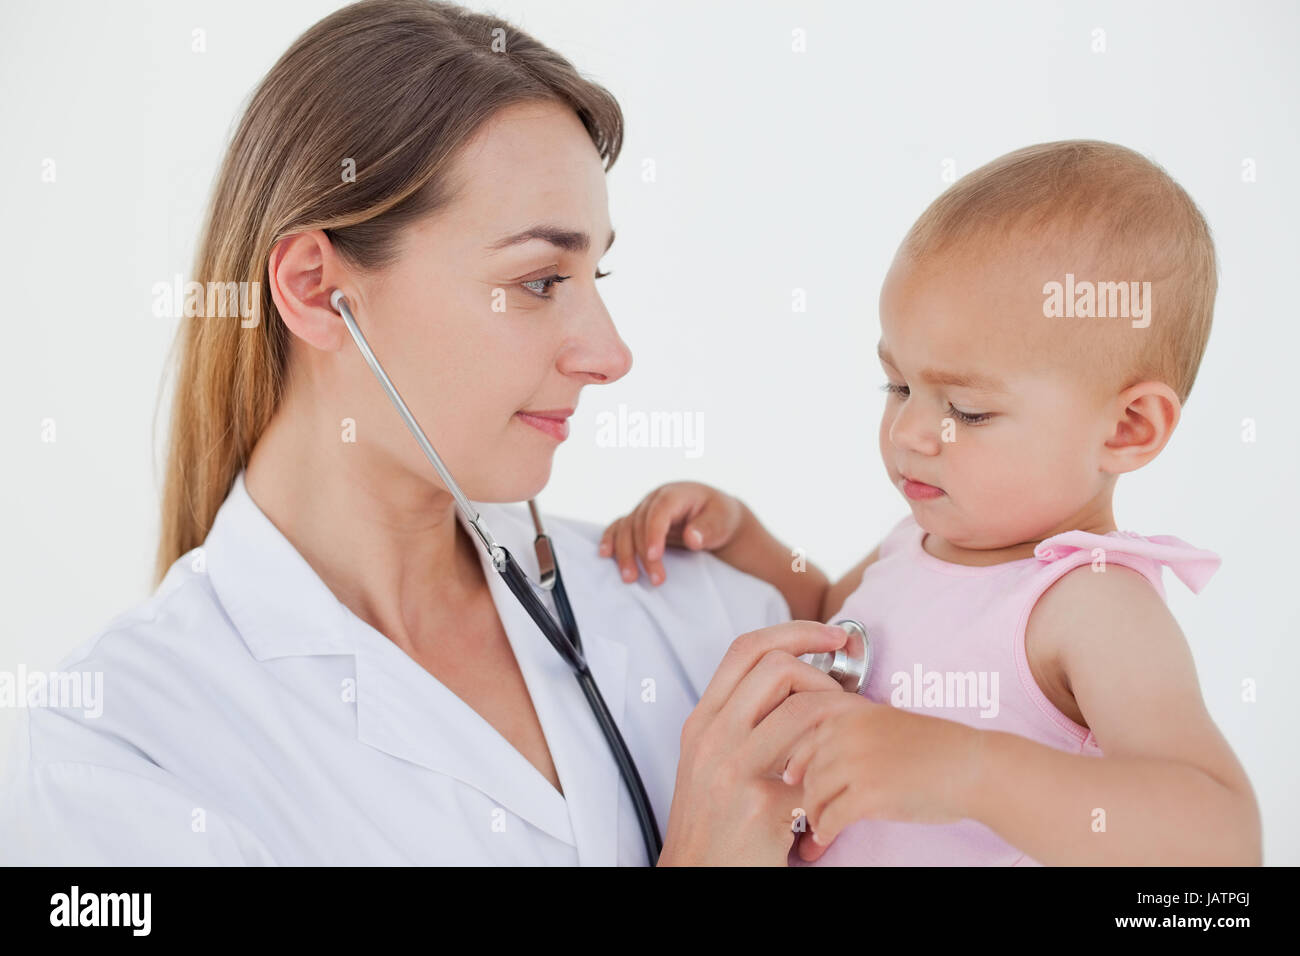 Doctor looking at the baby while auscultating her Stock Photo